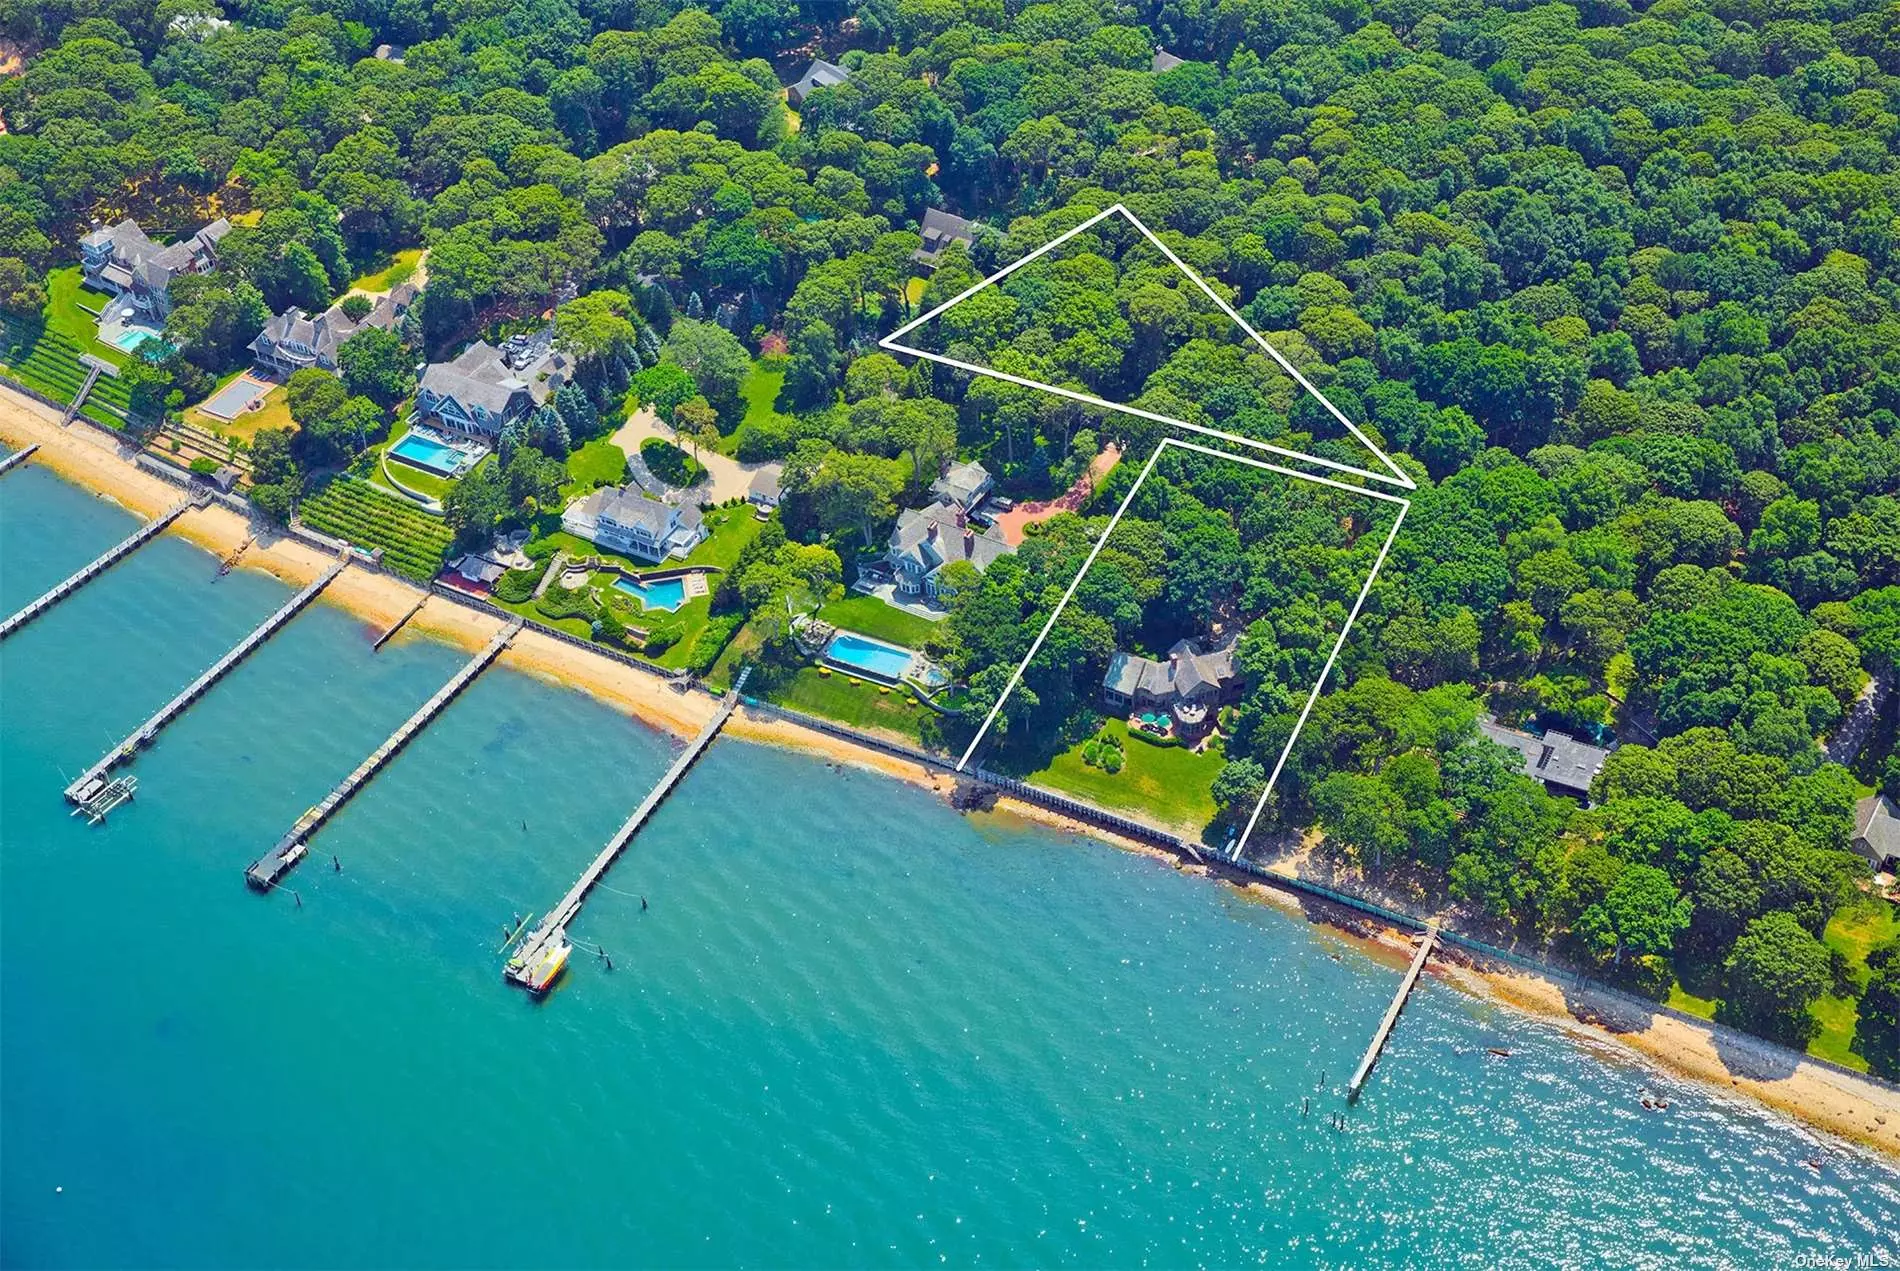 Panoramic Waterfront Gem in North Haven Spectacular North Haven waterfront! This spacious 5 bedroom, 4 bath home offers complete privacy with panoramic views of Shelter Island Sound and Mashomack Reserve/Shelter Island. Sited on over an acre of waterfront property, 168&rsquo; +/- of private beach with new bulkhead, steps down to a secluded beach ideal for swimming, kayaking, paddle boarding, and boating (dock pending). Expansive living room with impressive brick fireplace and oversized windows offering spectacular views. Watch the sunrise over the water from virtually everywhere on this stunning property. Discover a new route to your favorite places by boat in Greenport or Salt Restaurant and Ram&rsquo;s Head Inn on Shelter Island. Truly a boater&rsquo;s paradise. Renovate existing our build new up to 6, 000+/- sq. ft. Additionally, there is a .76+/- acre lot available at $1, 100, 000 to create your own compound. Only 2 miles to the heart of historic Sag Harbor Village.